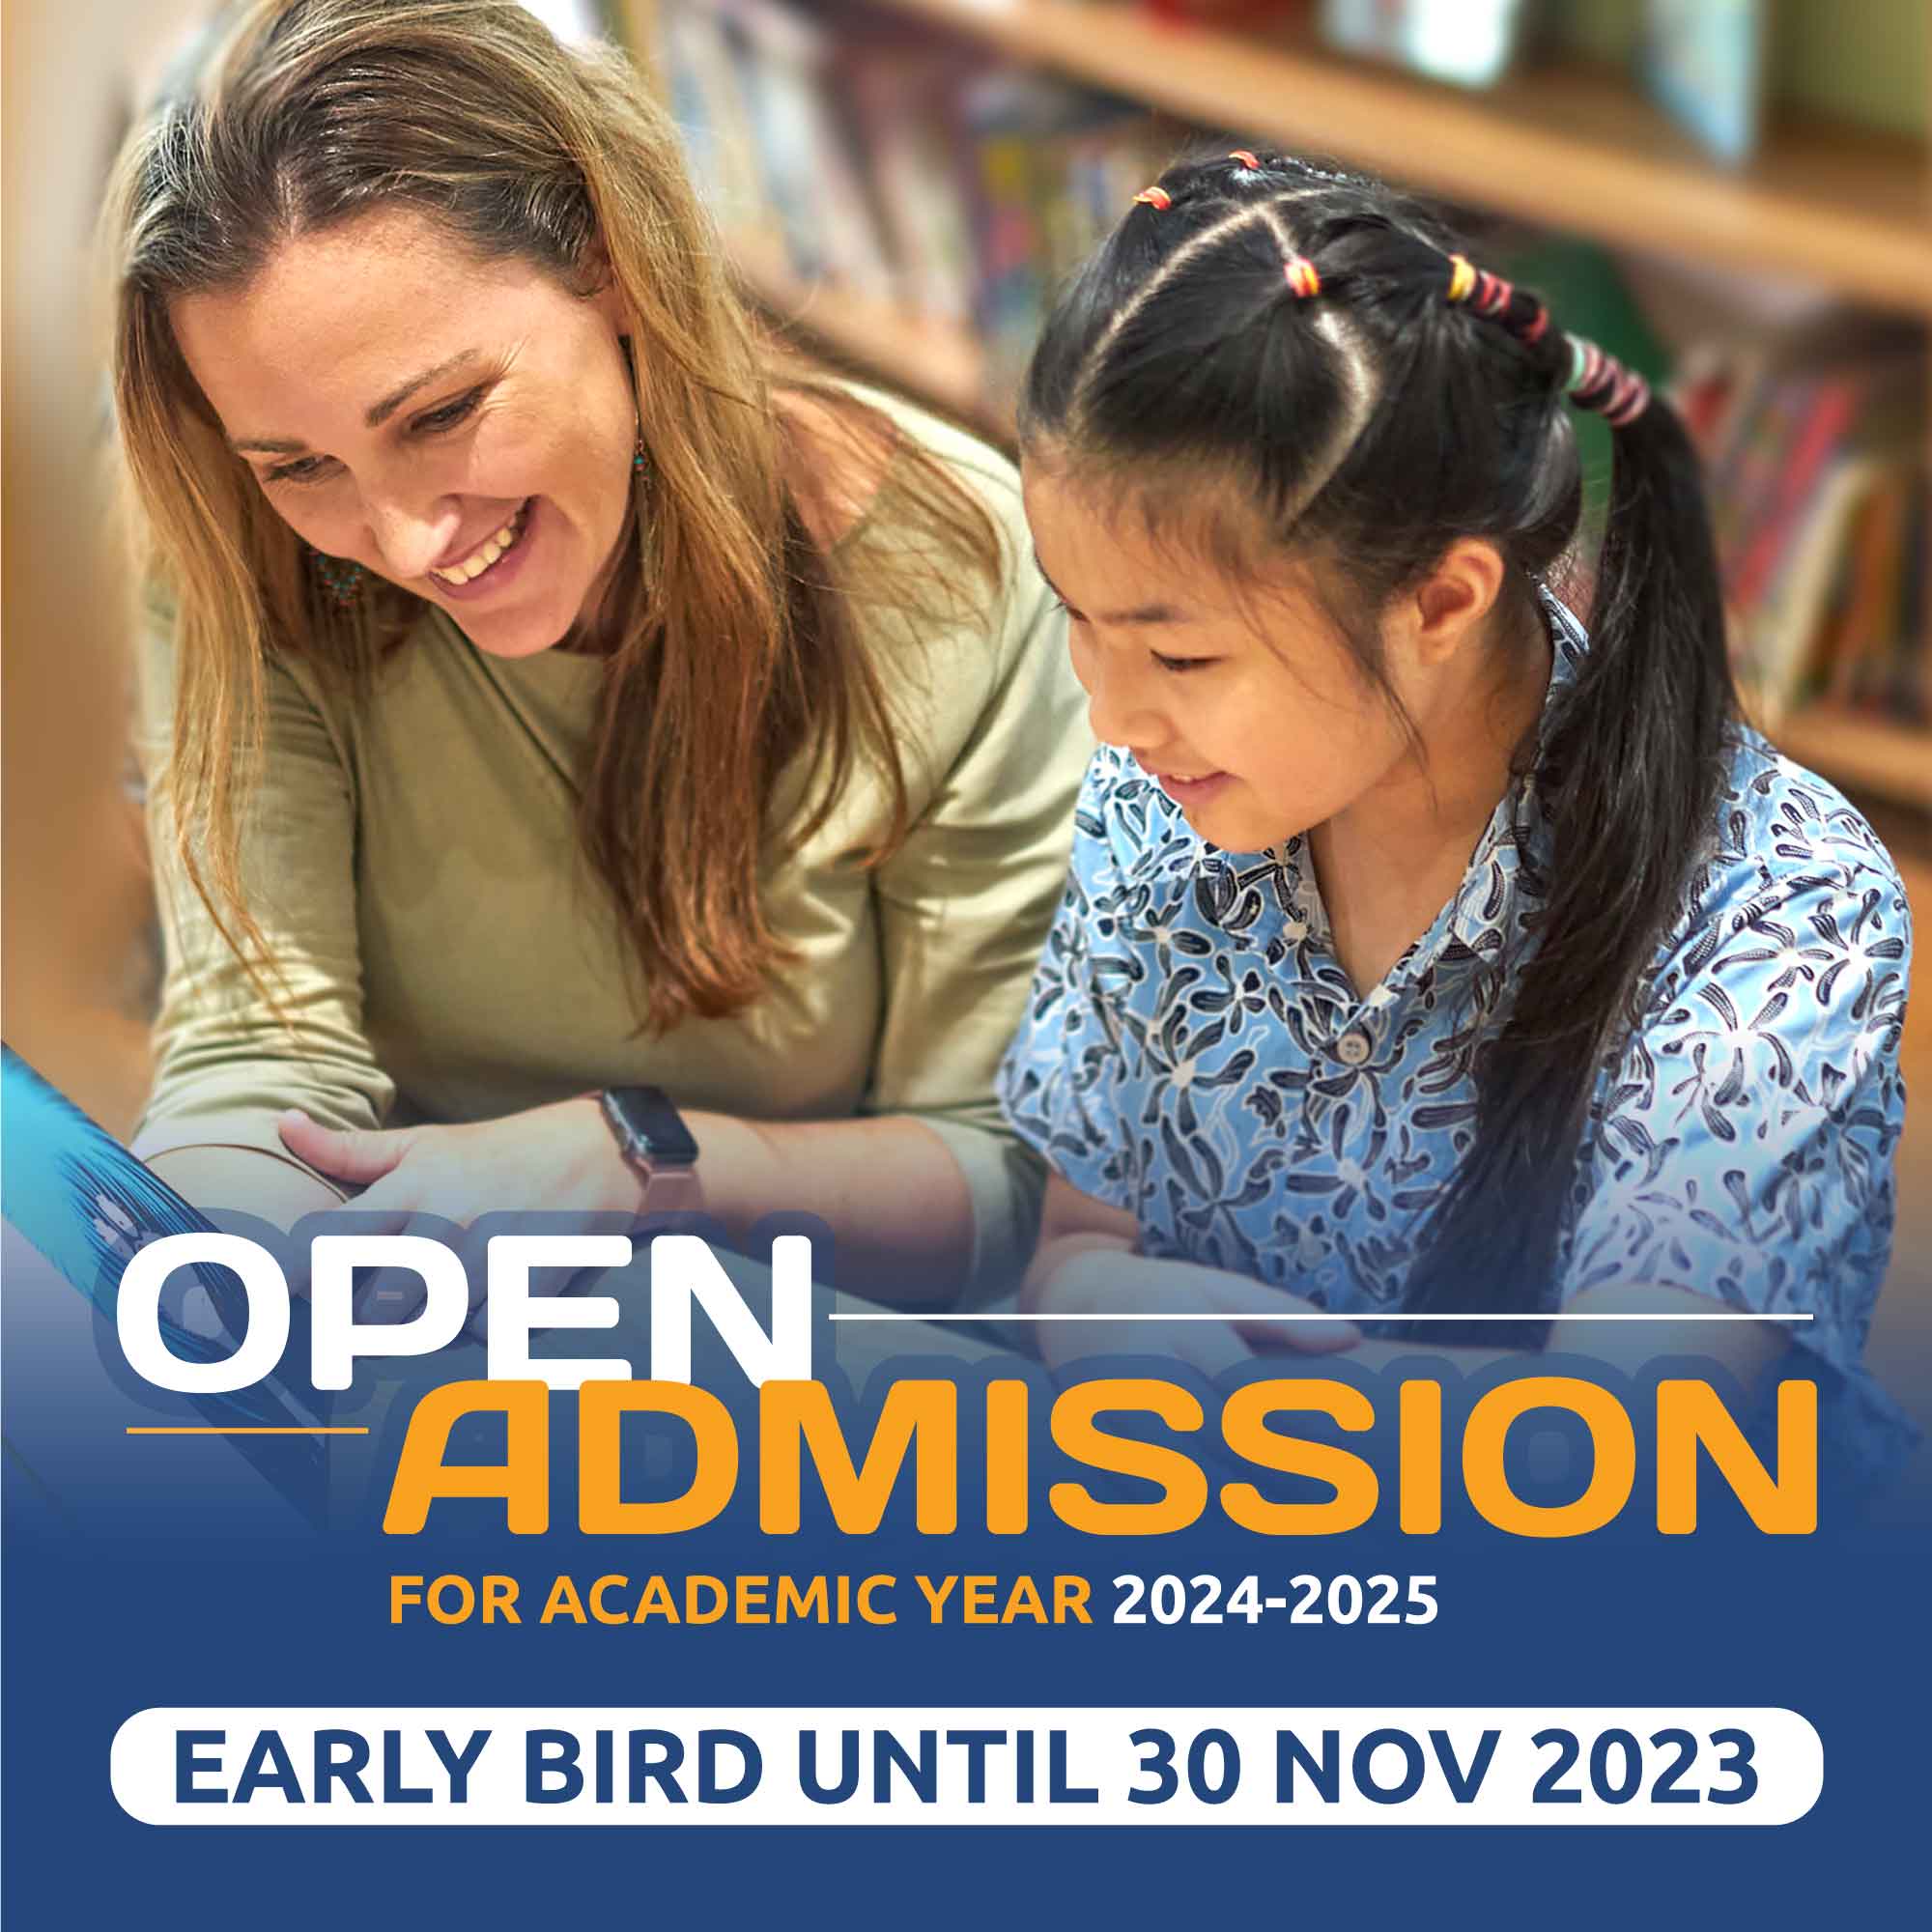 SIS-PIK Open Admission for Academic Year 2024-2025 Early Bird - mobile version